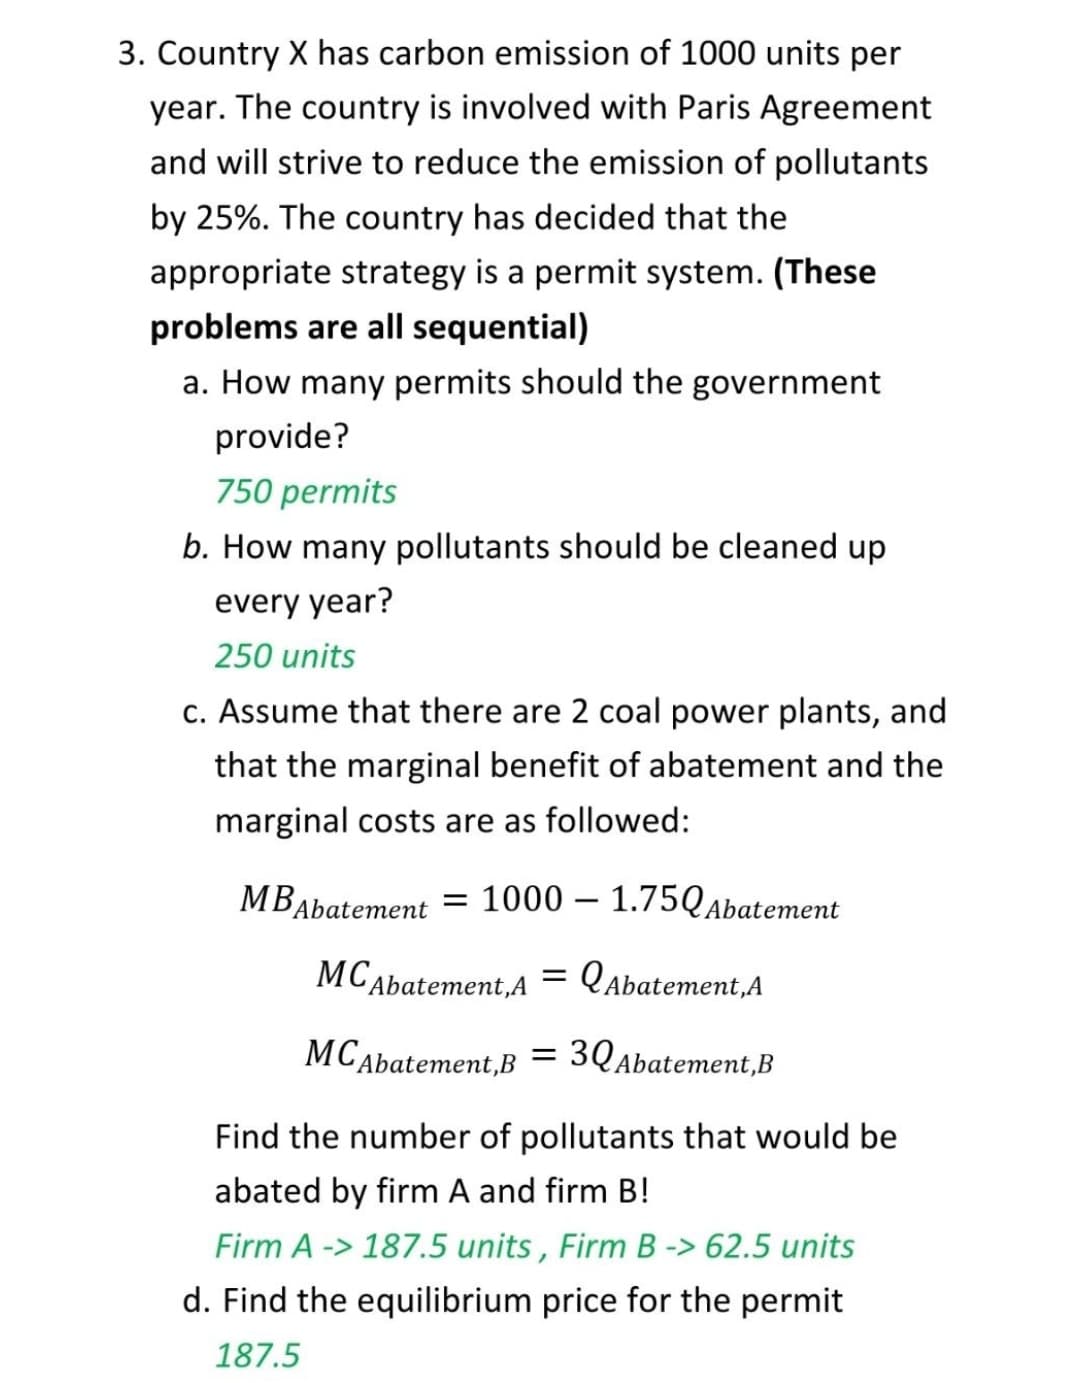 3. Country X has carbon emission of 1000 units per
year. The country is involved with Paris Agreement
and will strive to reduce the emission of pollutants
by 25%. The country has decided that the
appropriate strategy is a permit system. (These
problems are all sequential)
a. How many permits should the government
provide?
750 permits
b. How many pollutants should be cleaned up
every year?
250 units
c. Assume that there are 2 coal power plants, and
that the marginal benefit of abatement and the
marginal costs are as followed:
MBAbatement = 1000 – 1.75QAbatement
МСдbatement,A
= Qabatement,A
МСAbatement,B
3QAbatement,B
Find the number of pollutants that would be
abated by firm A and firm B!
Firm A -> 187.5 units , Firm B -> 62.5 units
d. Find the equilibrium price for the permit
187.5
